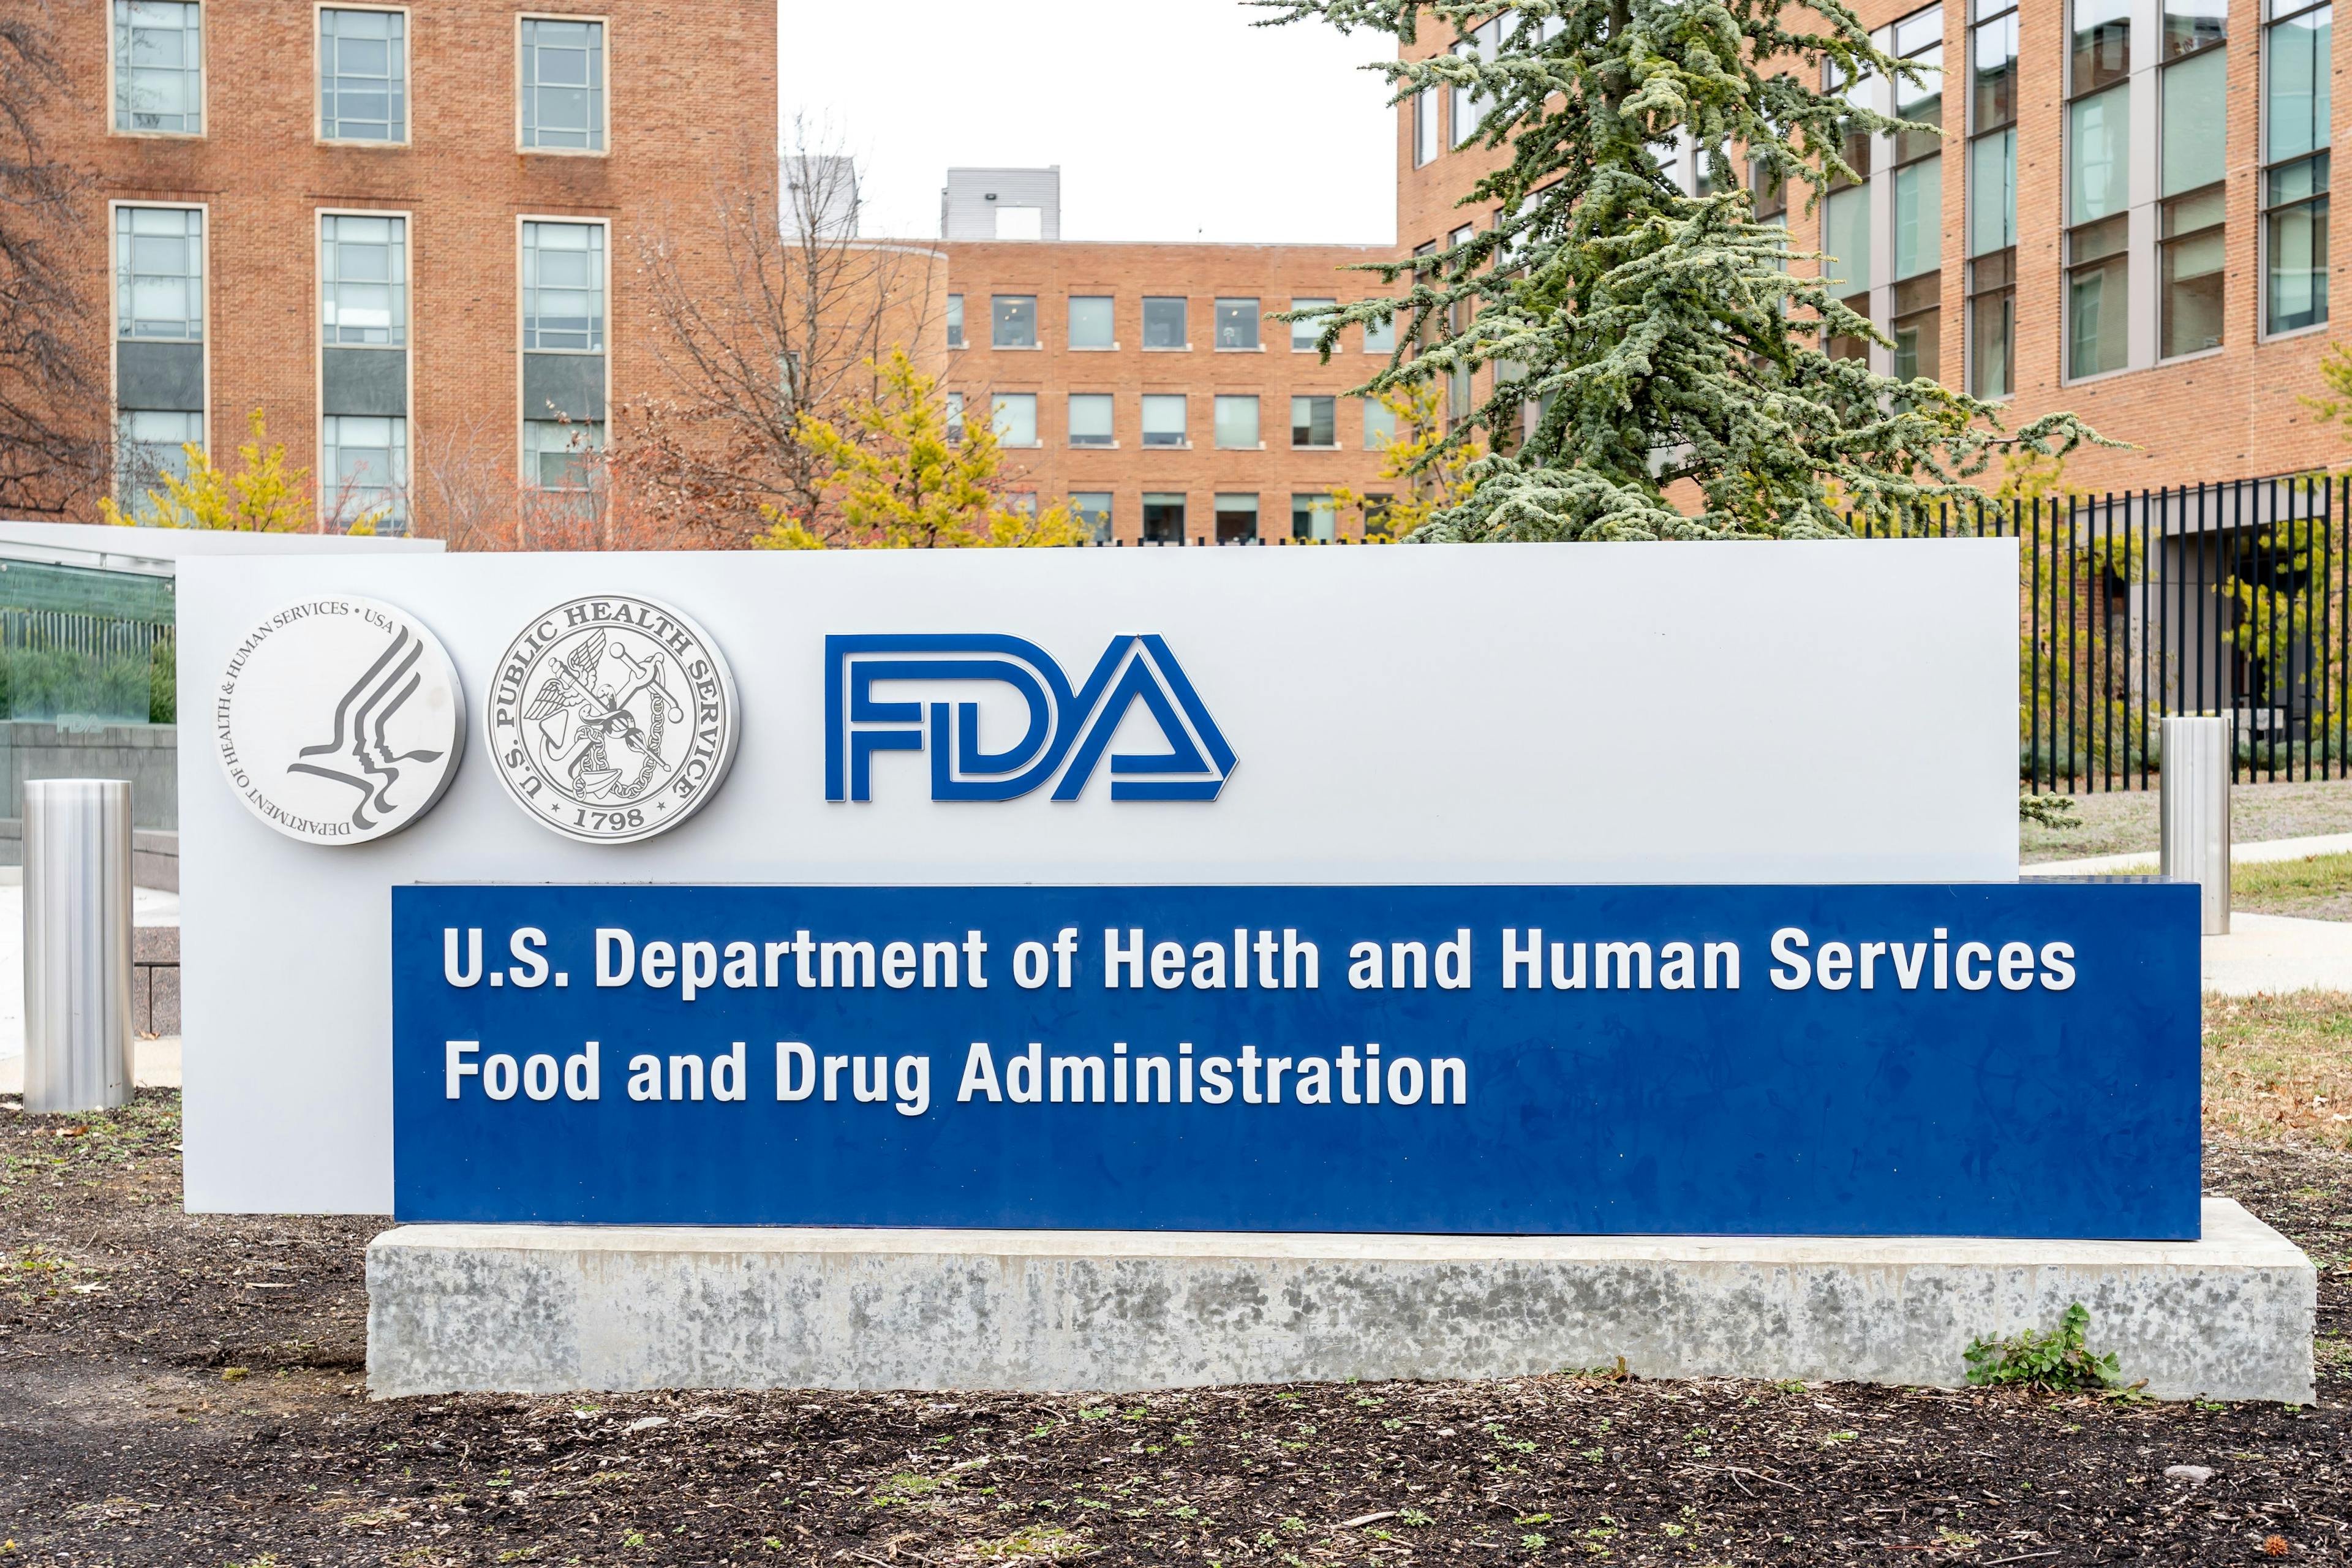 Journey Submits New Drug Application for DFD-29 for Rosacea